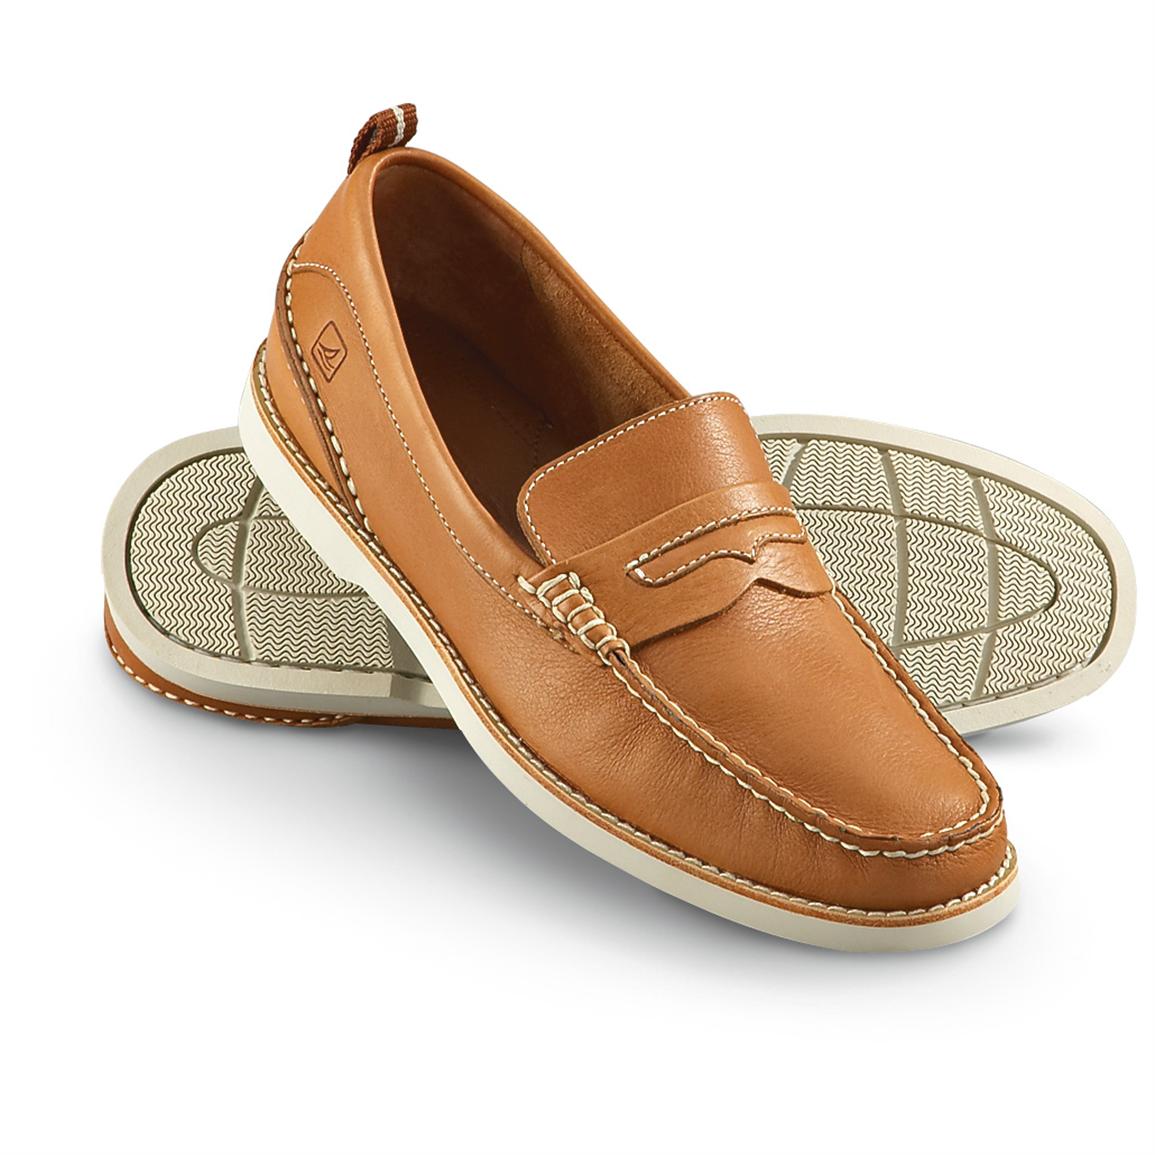 Men's Casual Loafers Sale